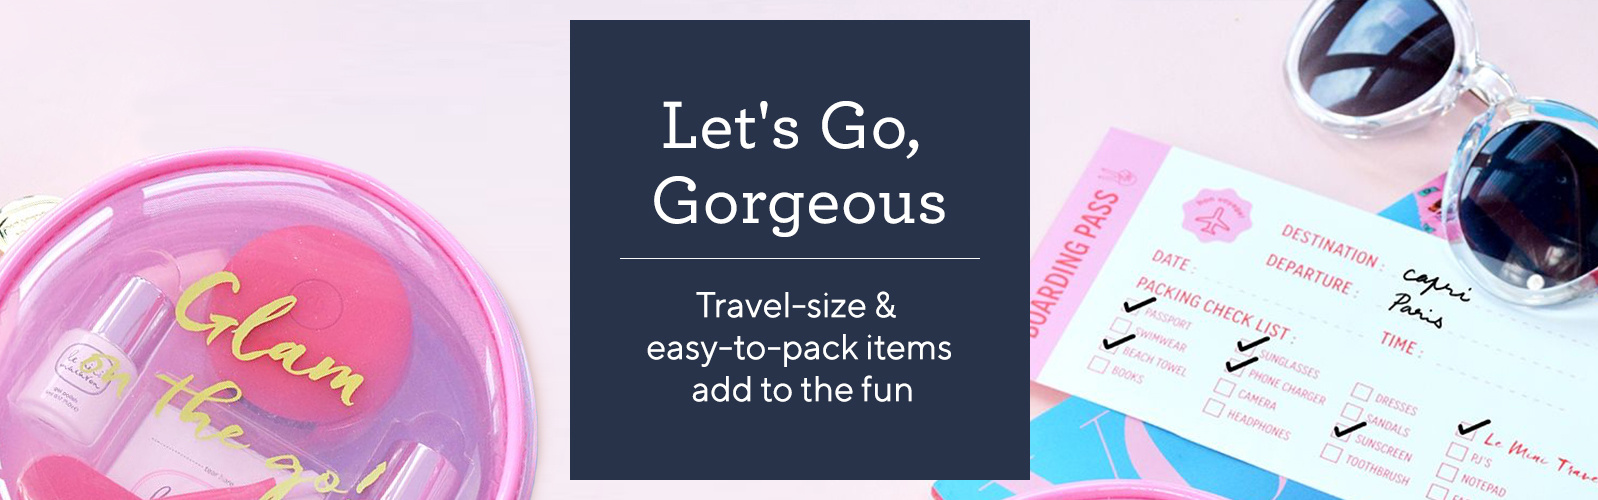 Let's Go, Gorgeous.  Travel-size & easy-to-pack items add to the fun.